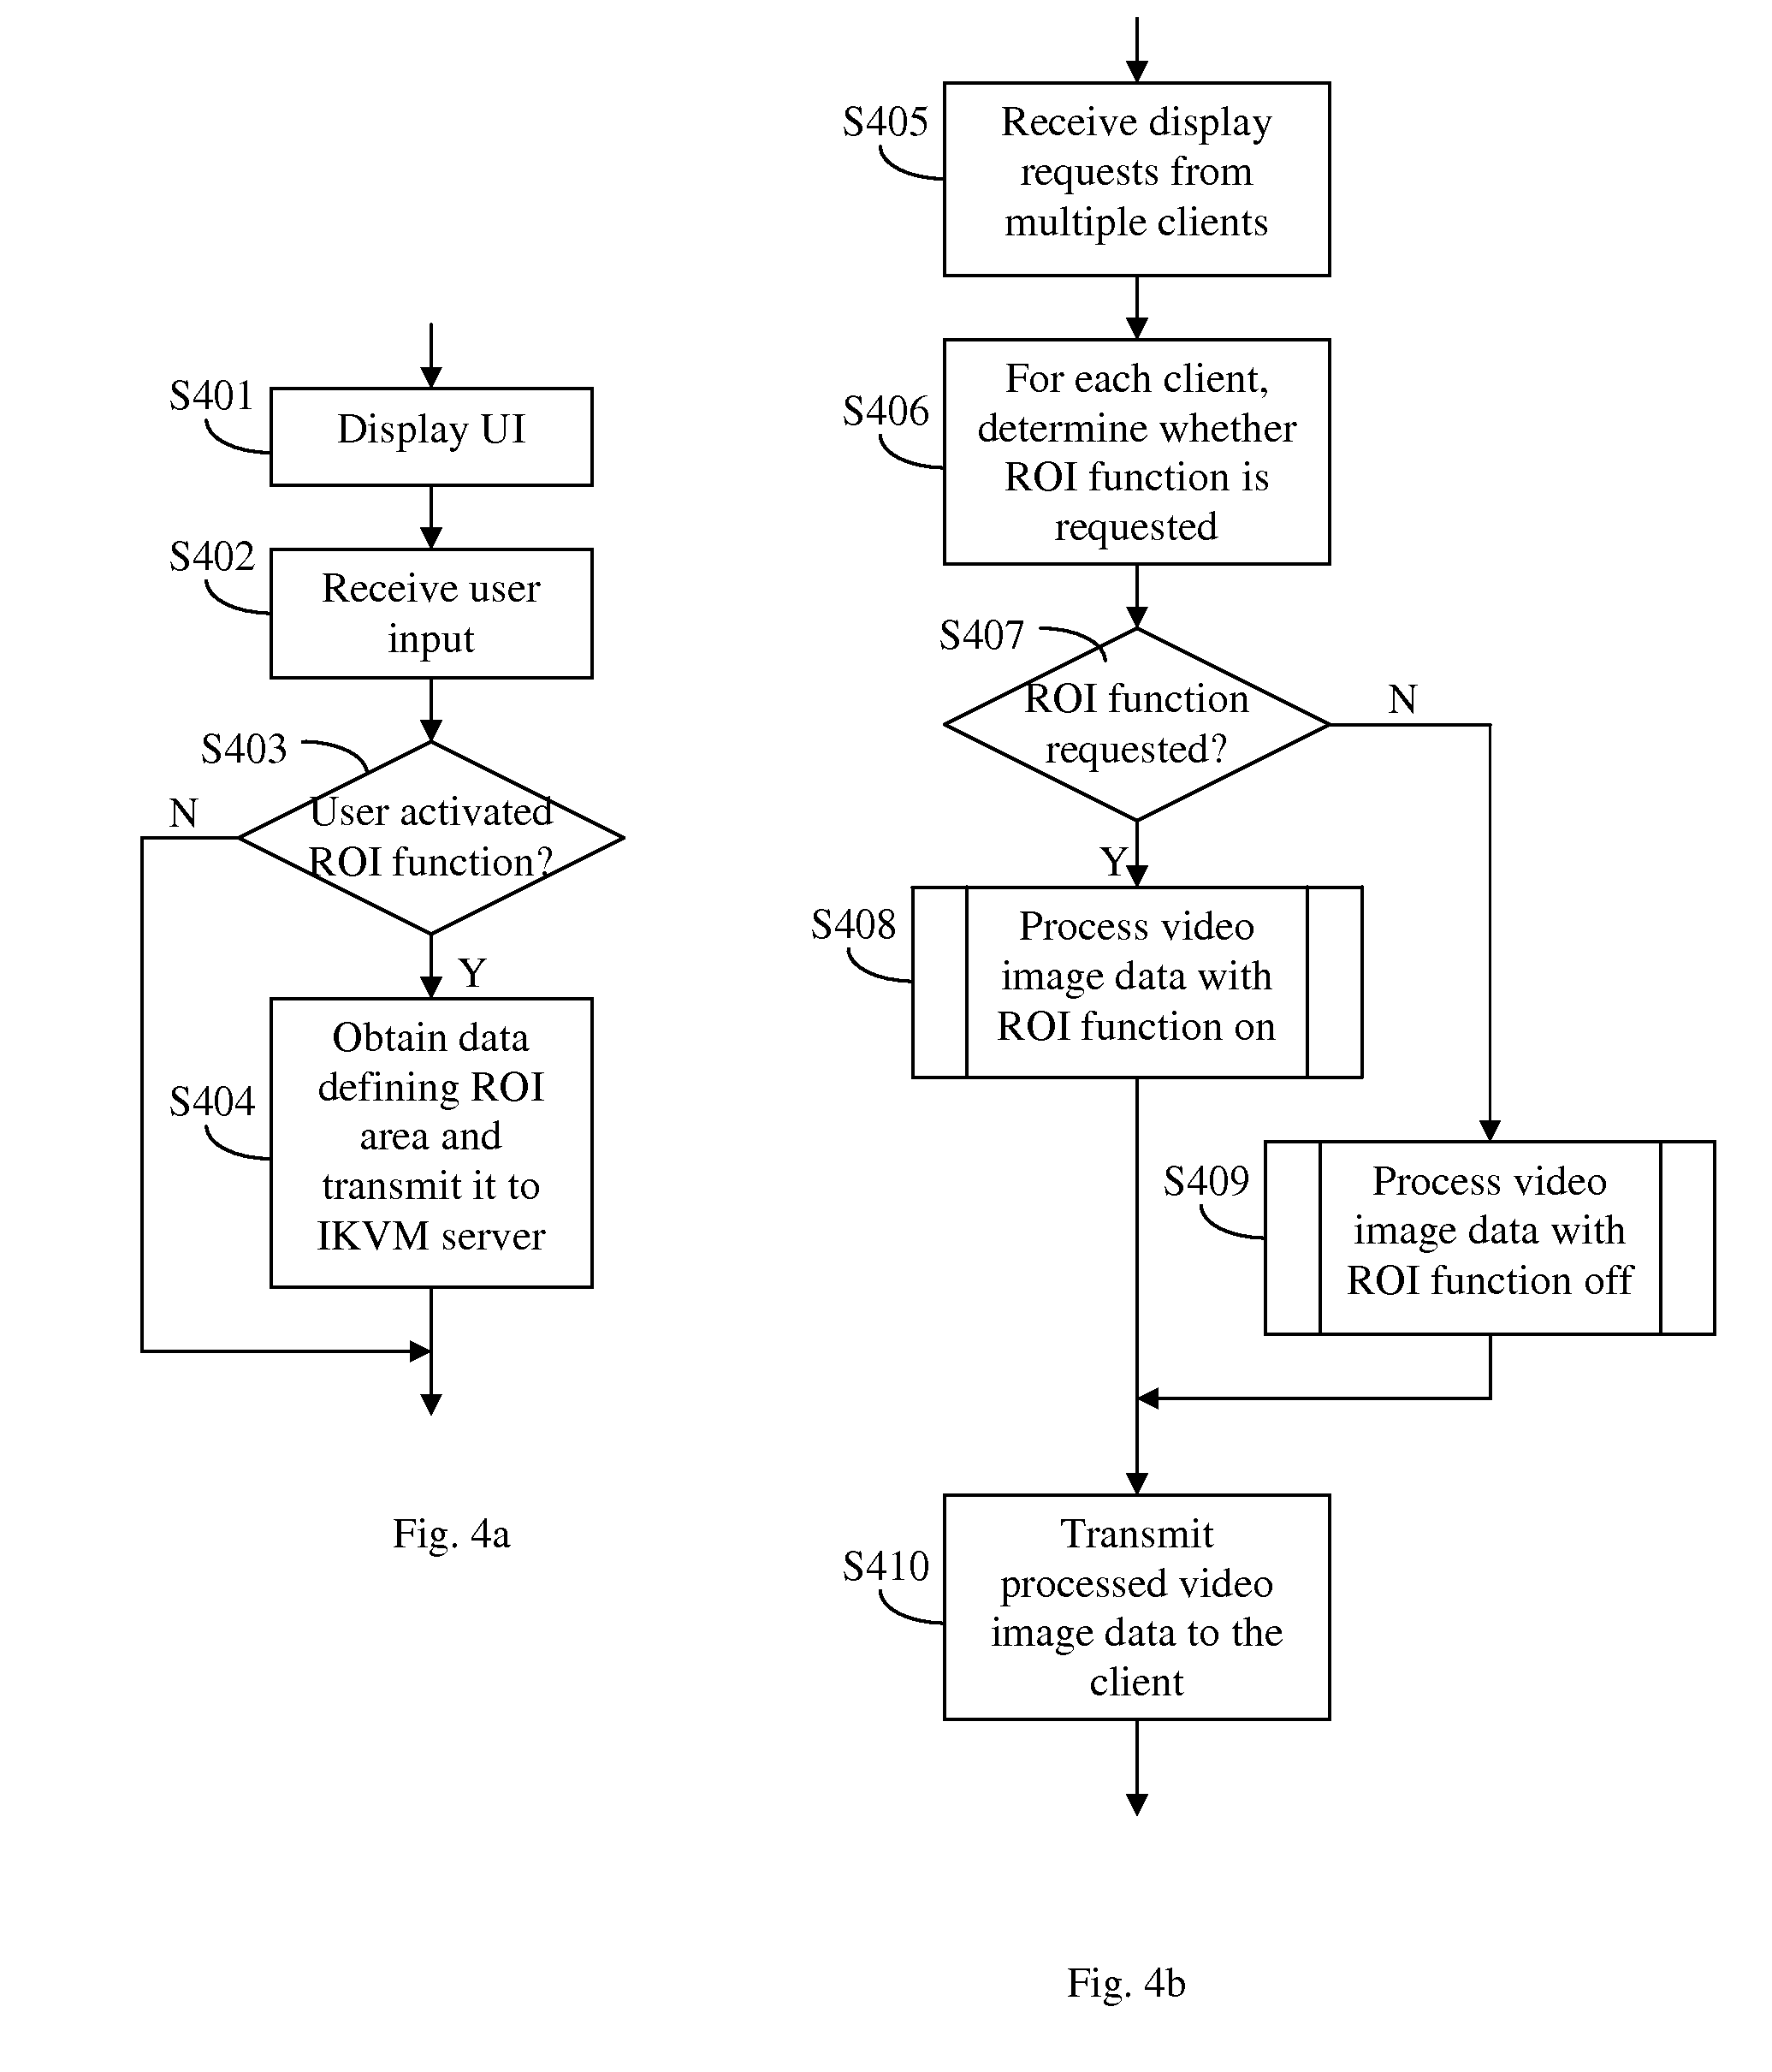 Image processing and transmission in a KVM switch system with special handling for regions of interest